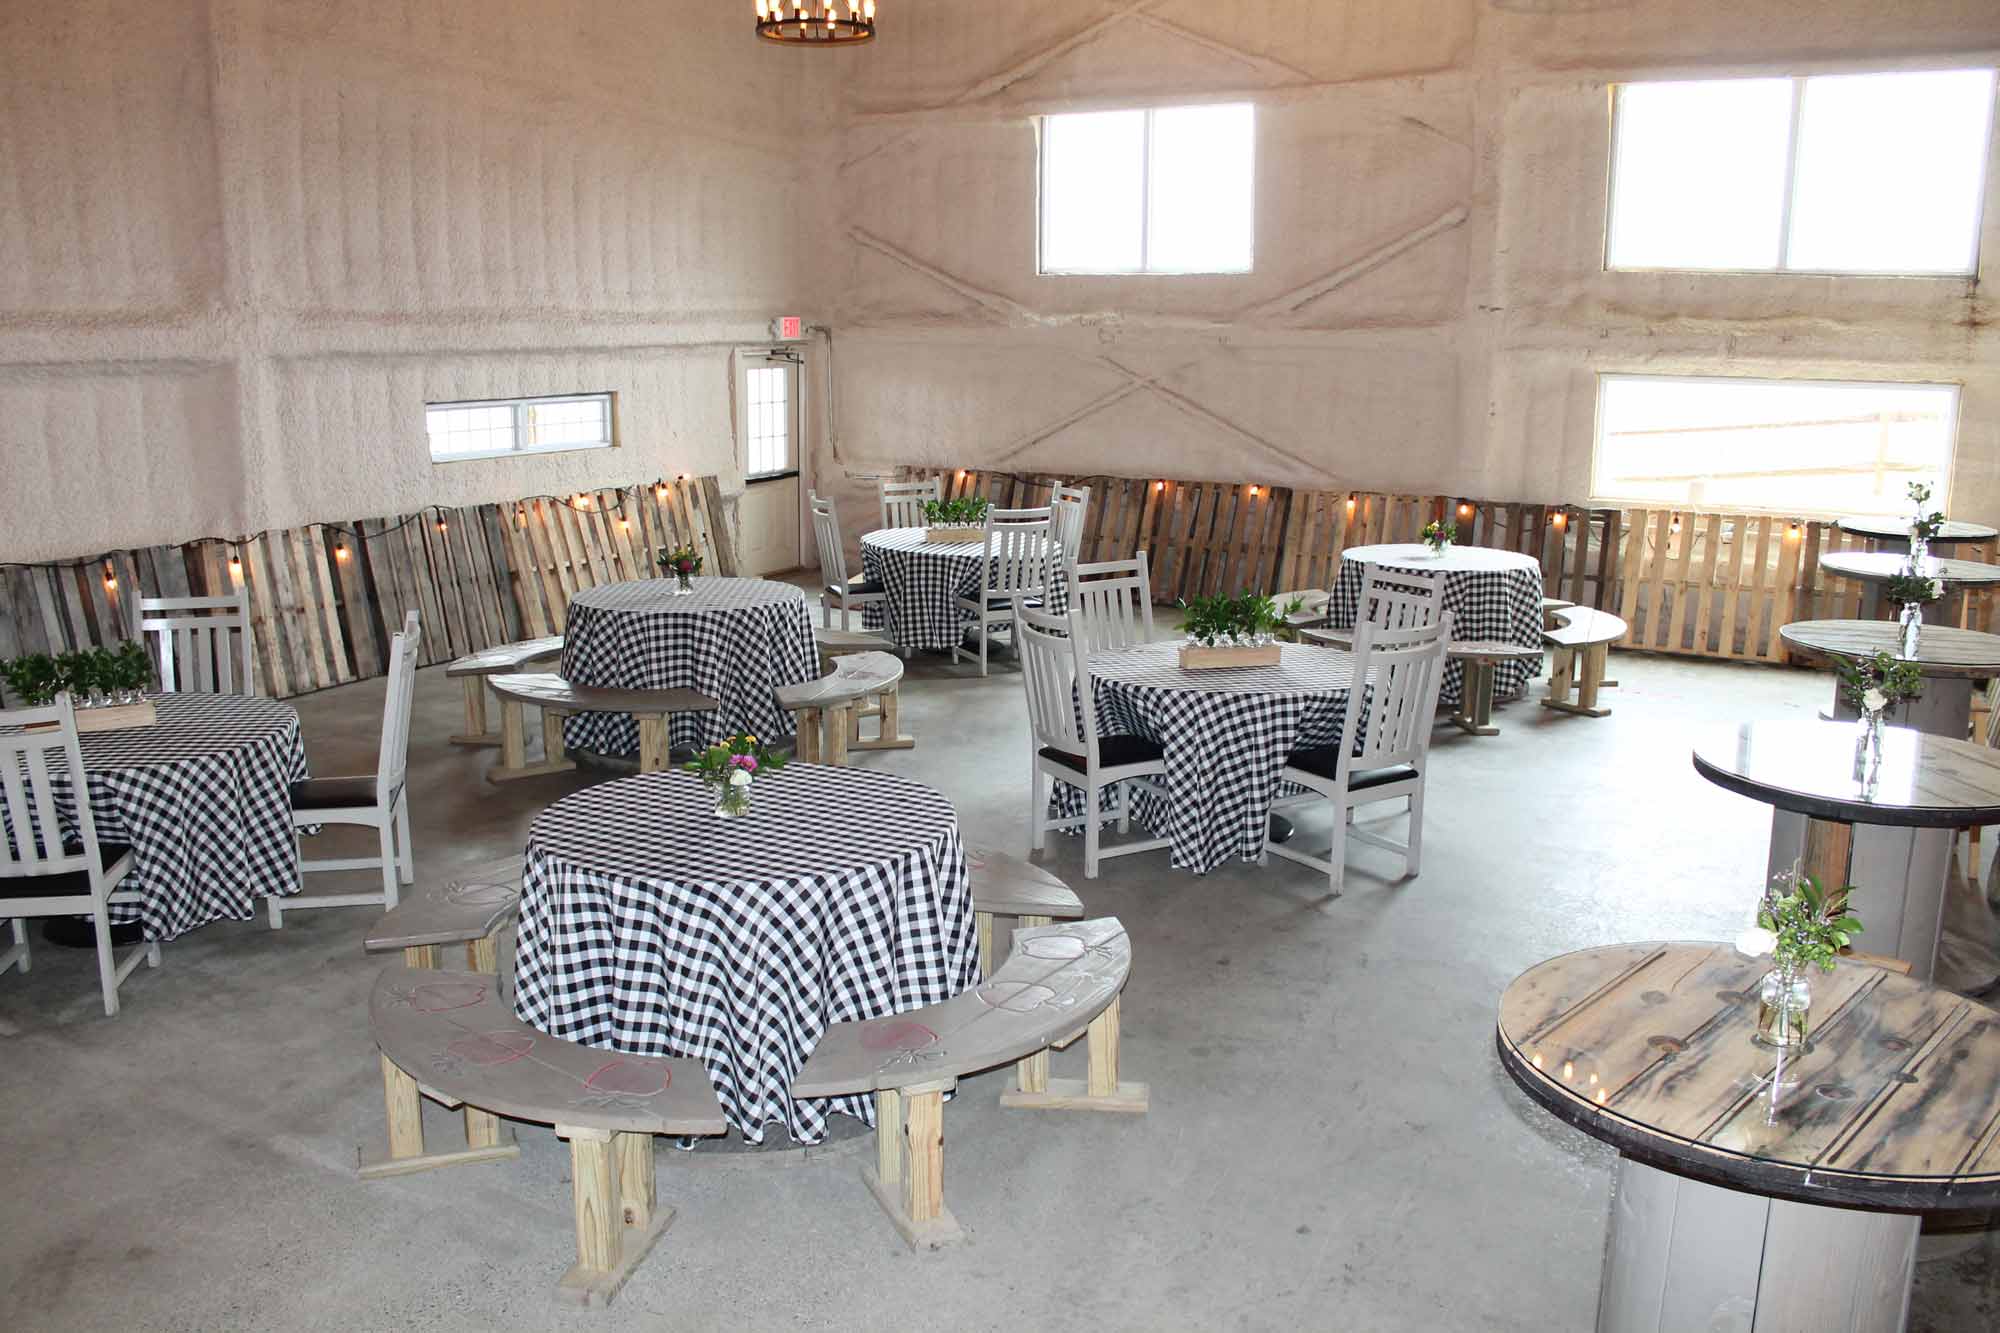 The room is staged with black and white checkered tablecloths covering the tables with bright light coming through the windows.